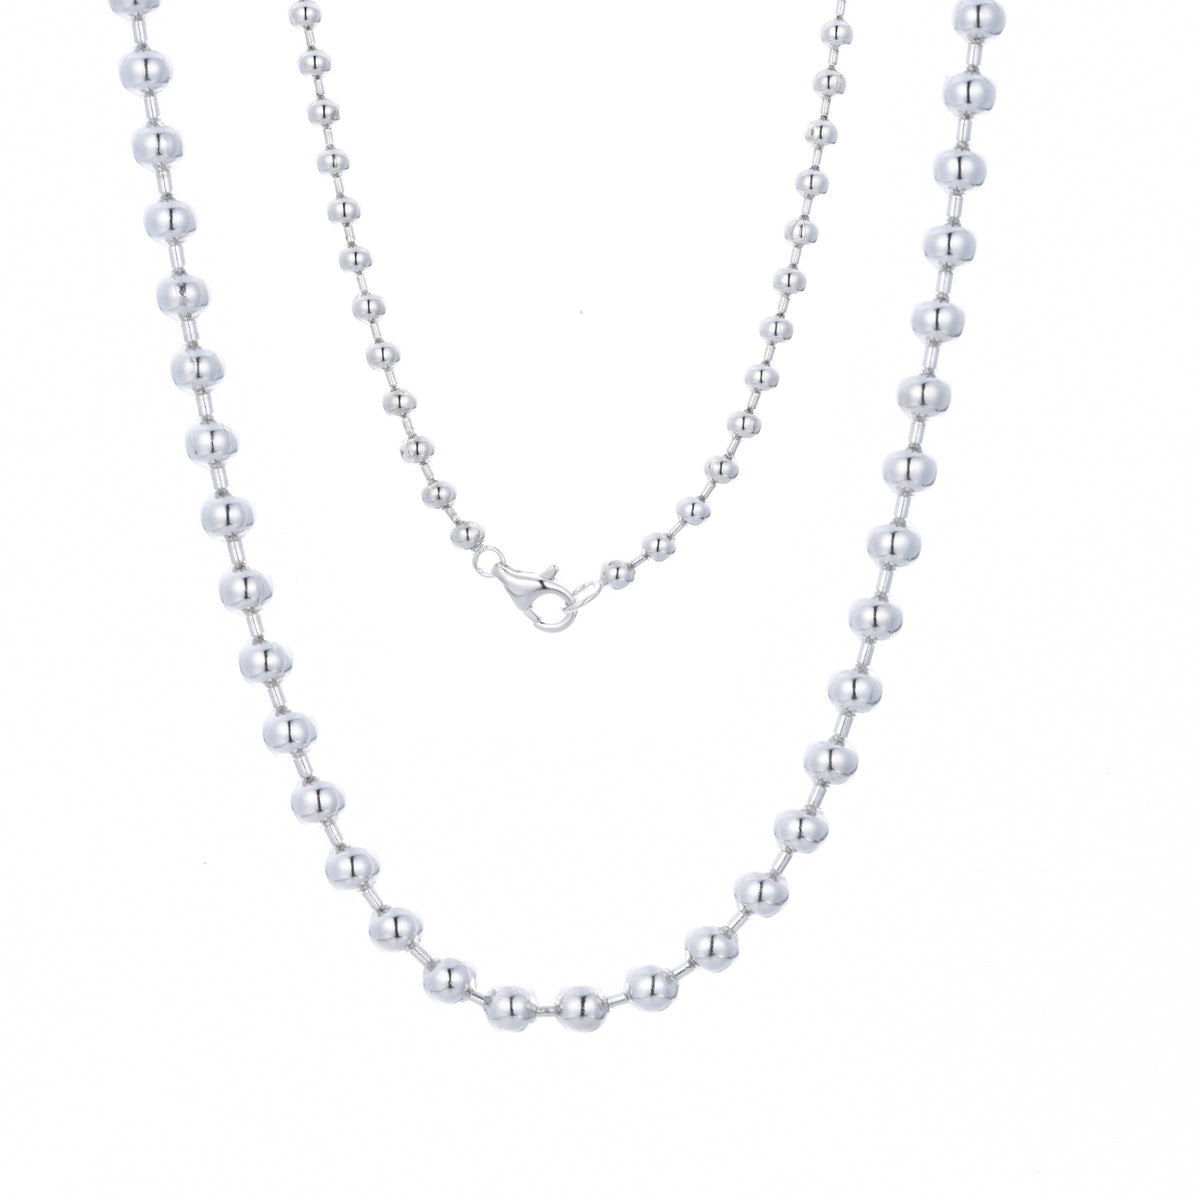 AEON II | New York Chain Necklace | Rhodium Plated 925 Silver